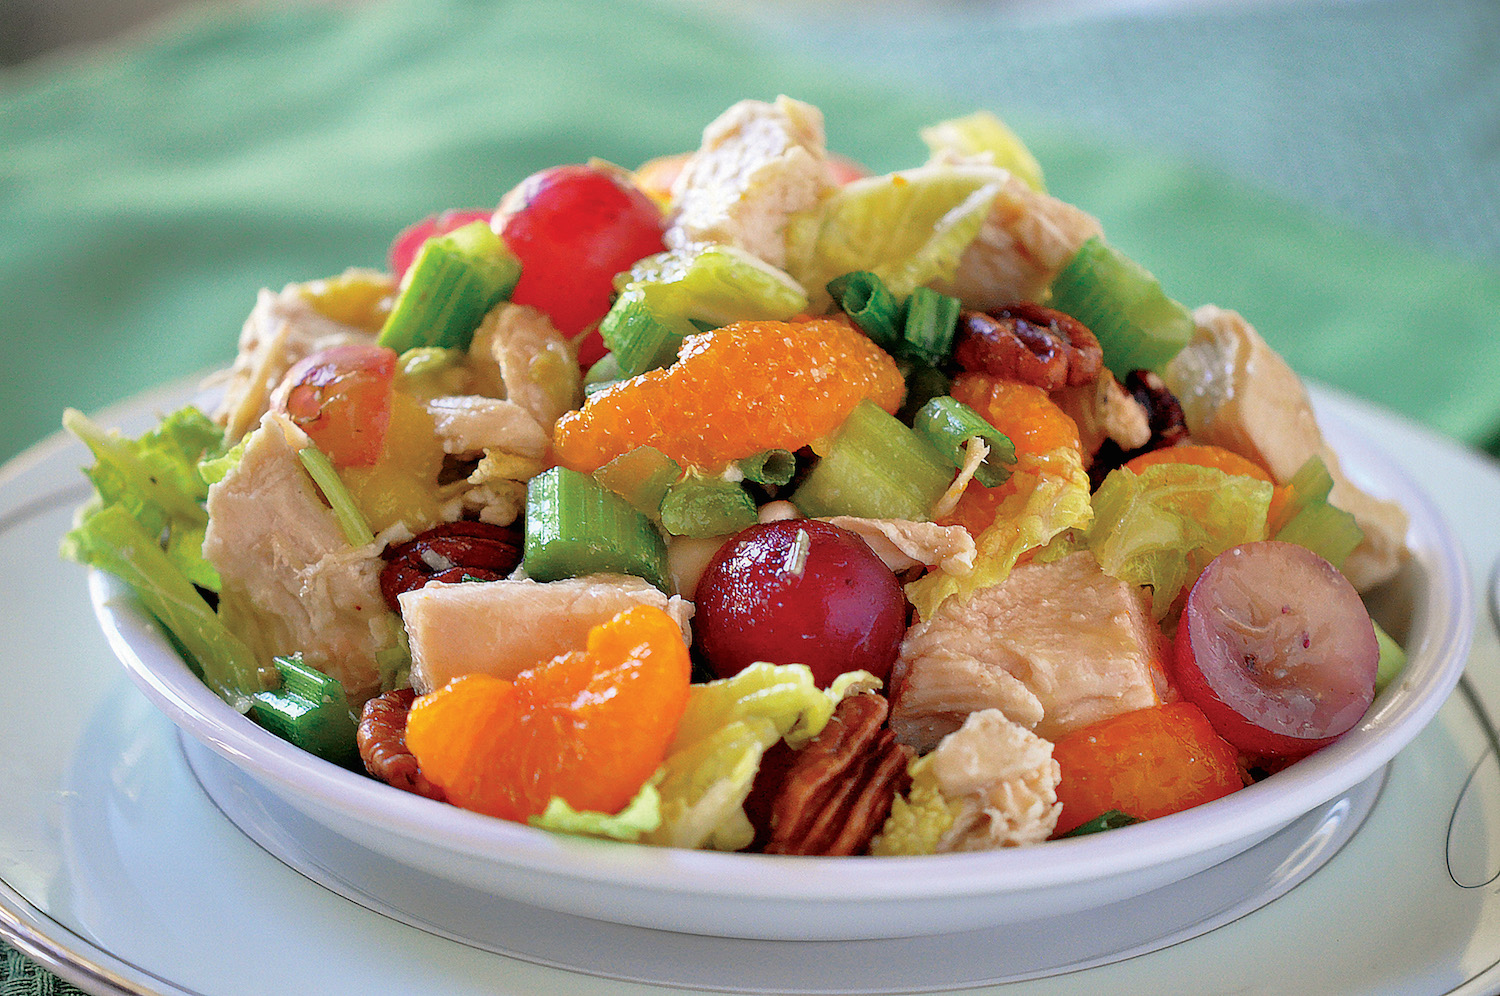 Holly-Chicken Salad with Citrus Vinaigrette